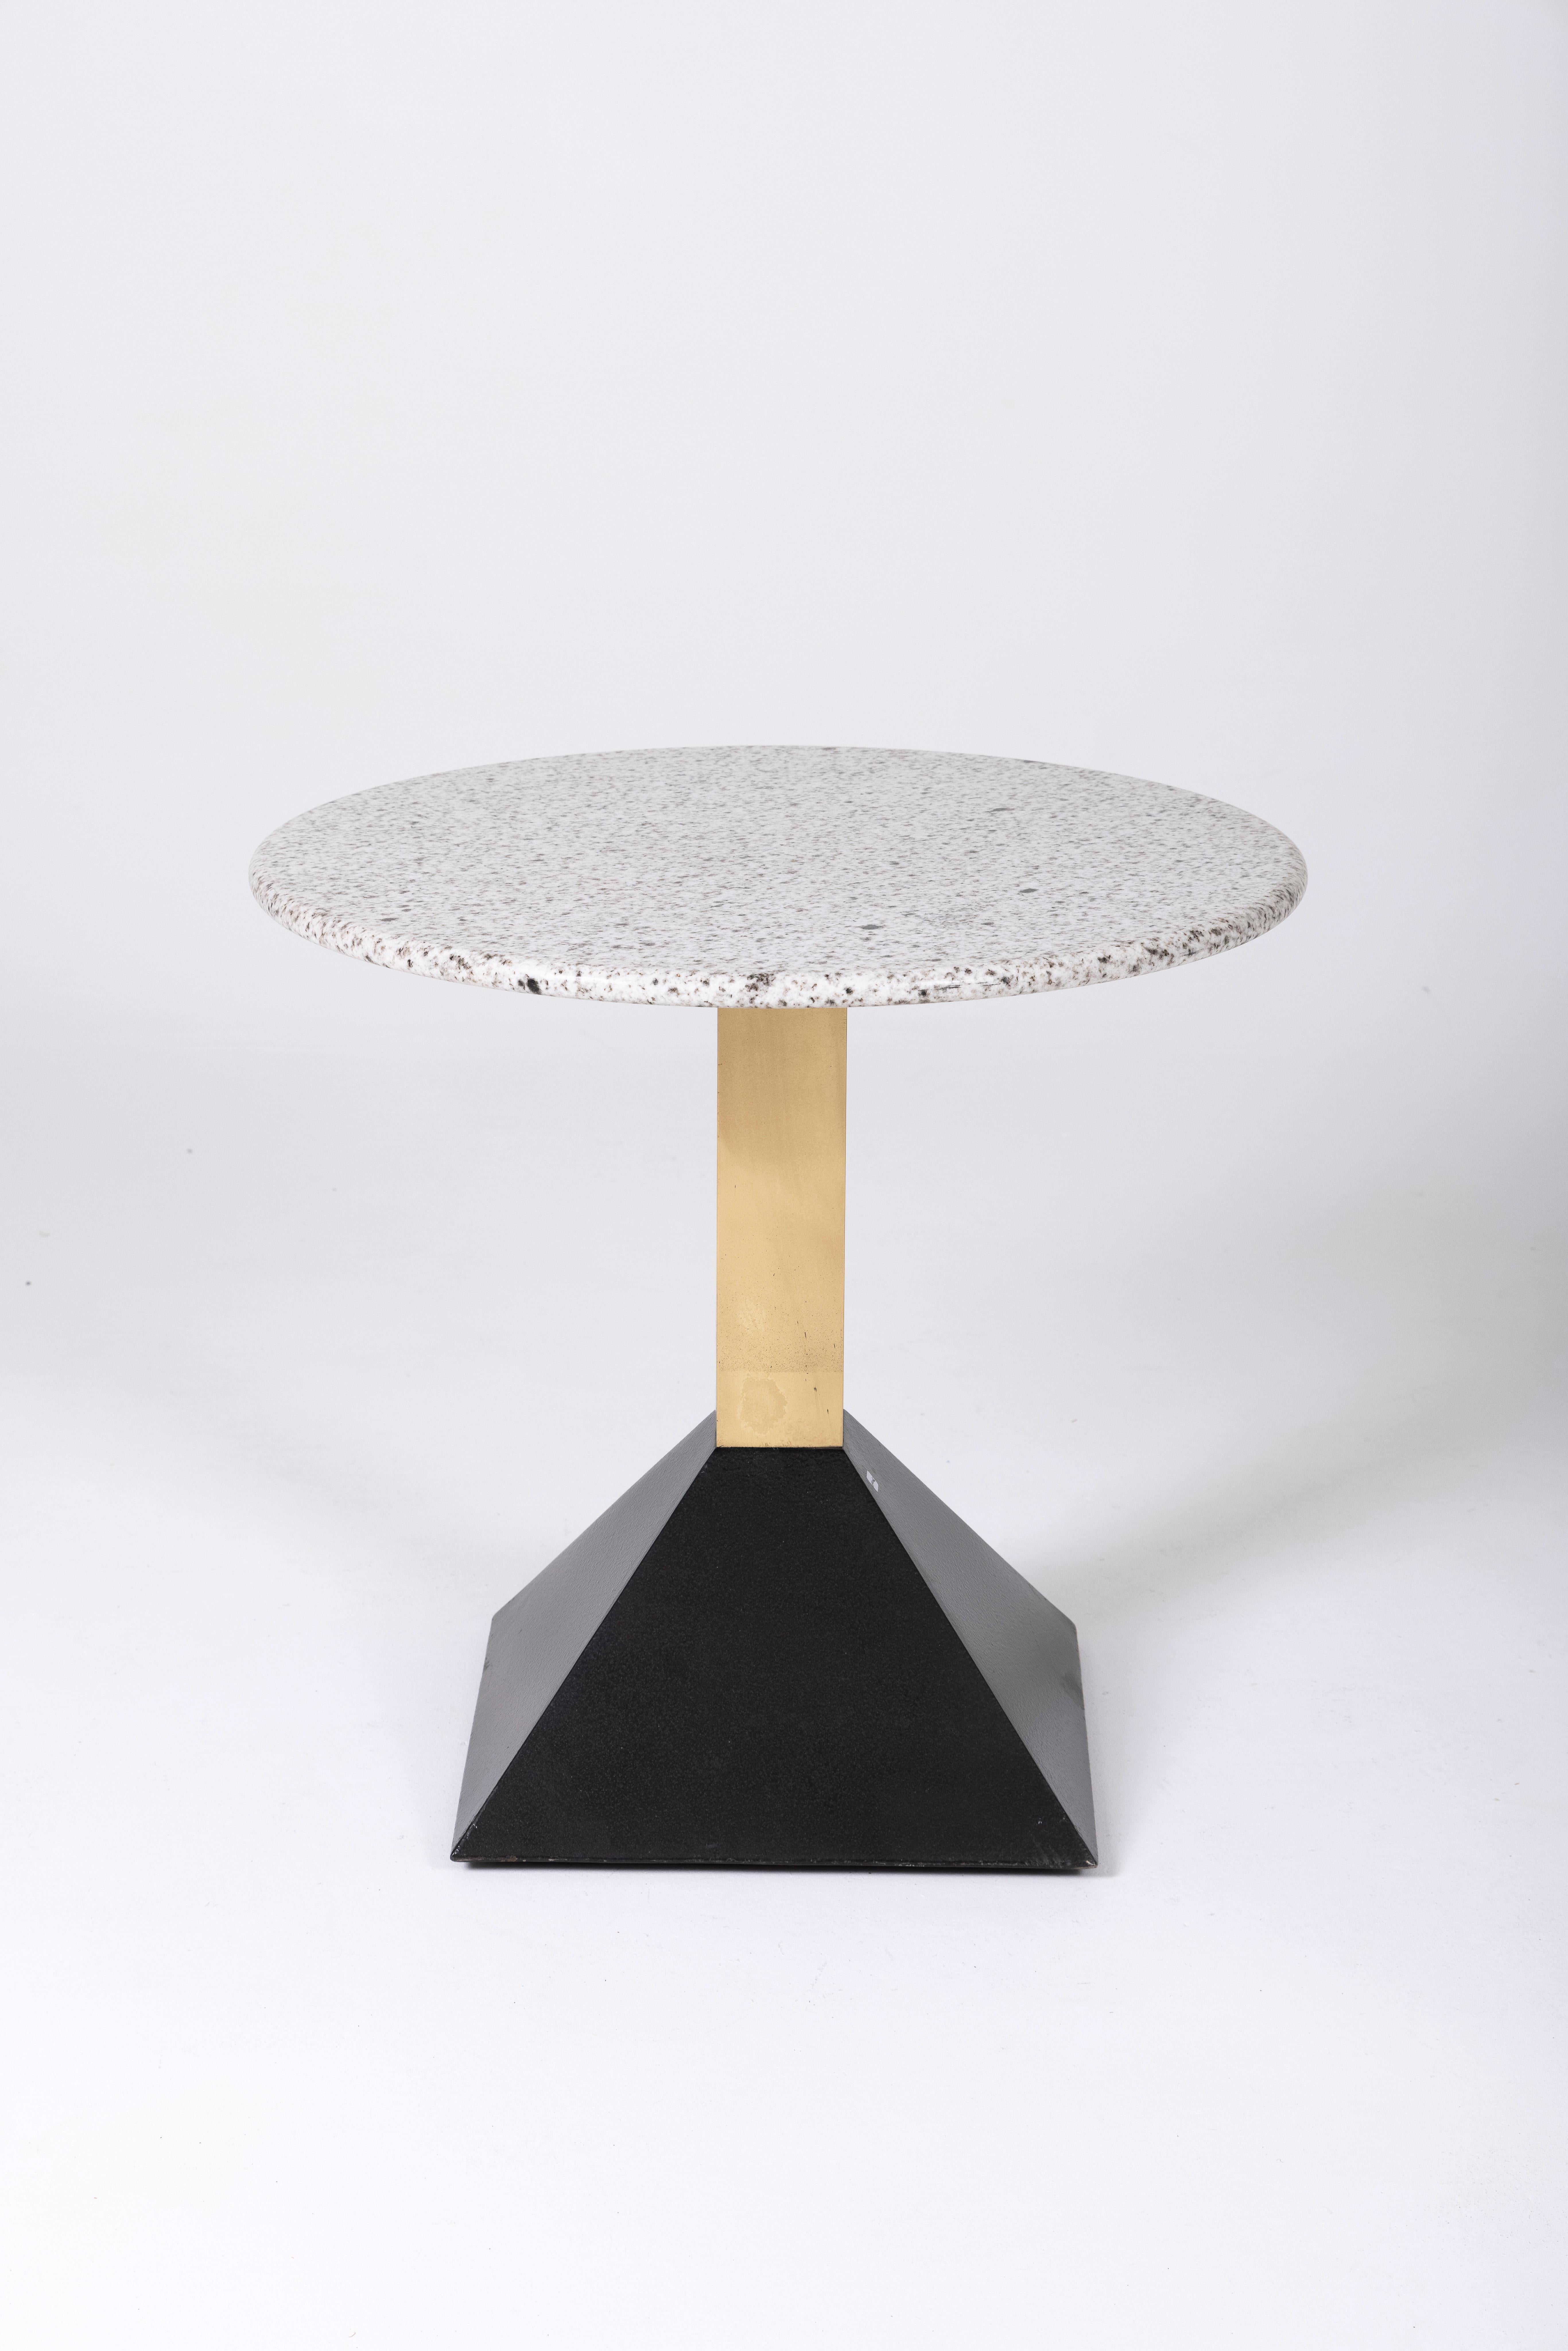 Terrazzo and brass side table from the 1980s. The tabletop is made of white and gray marble, while the base is crafted from black lacquered metal and brass. This pedestal table complements Memphis-style furniture.
DV148